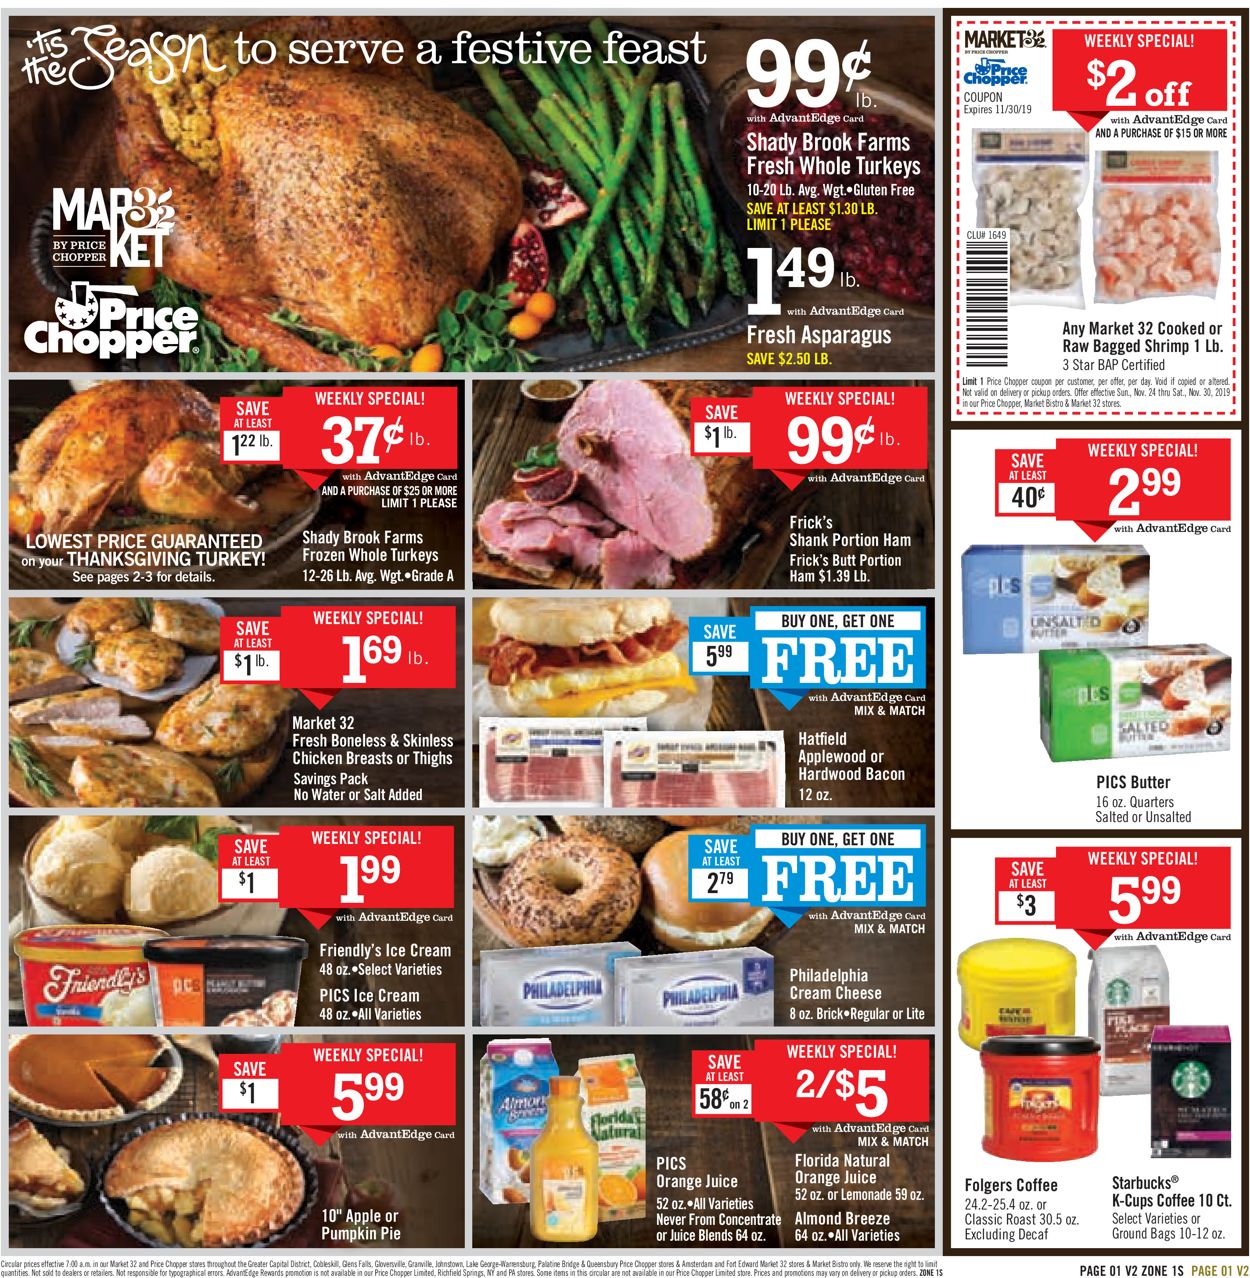 Price Chopper - Thanksgiving Ad 2019 Weekly Ad Circular - valid 11/24-11/30/2019 (Page 5)